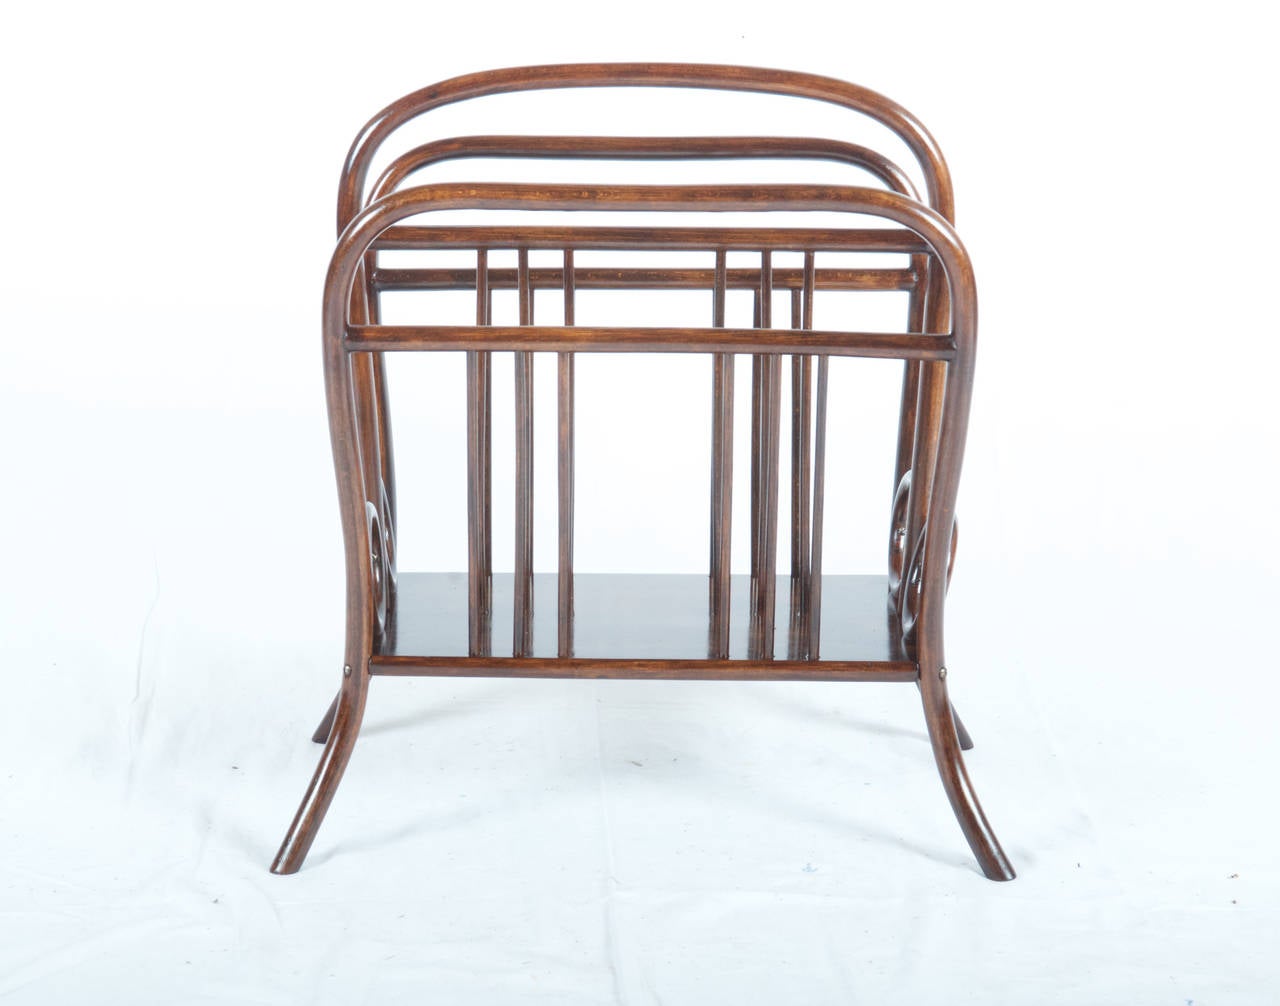 Vienna Secession Thonet Bentwood Music or Newspaper Rack, Catalogue Number 33